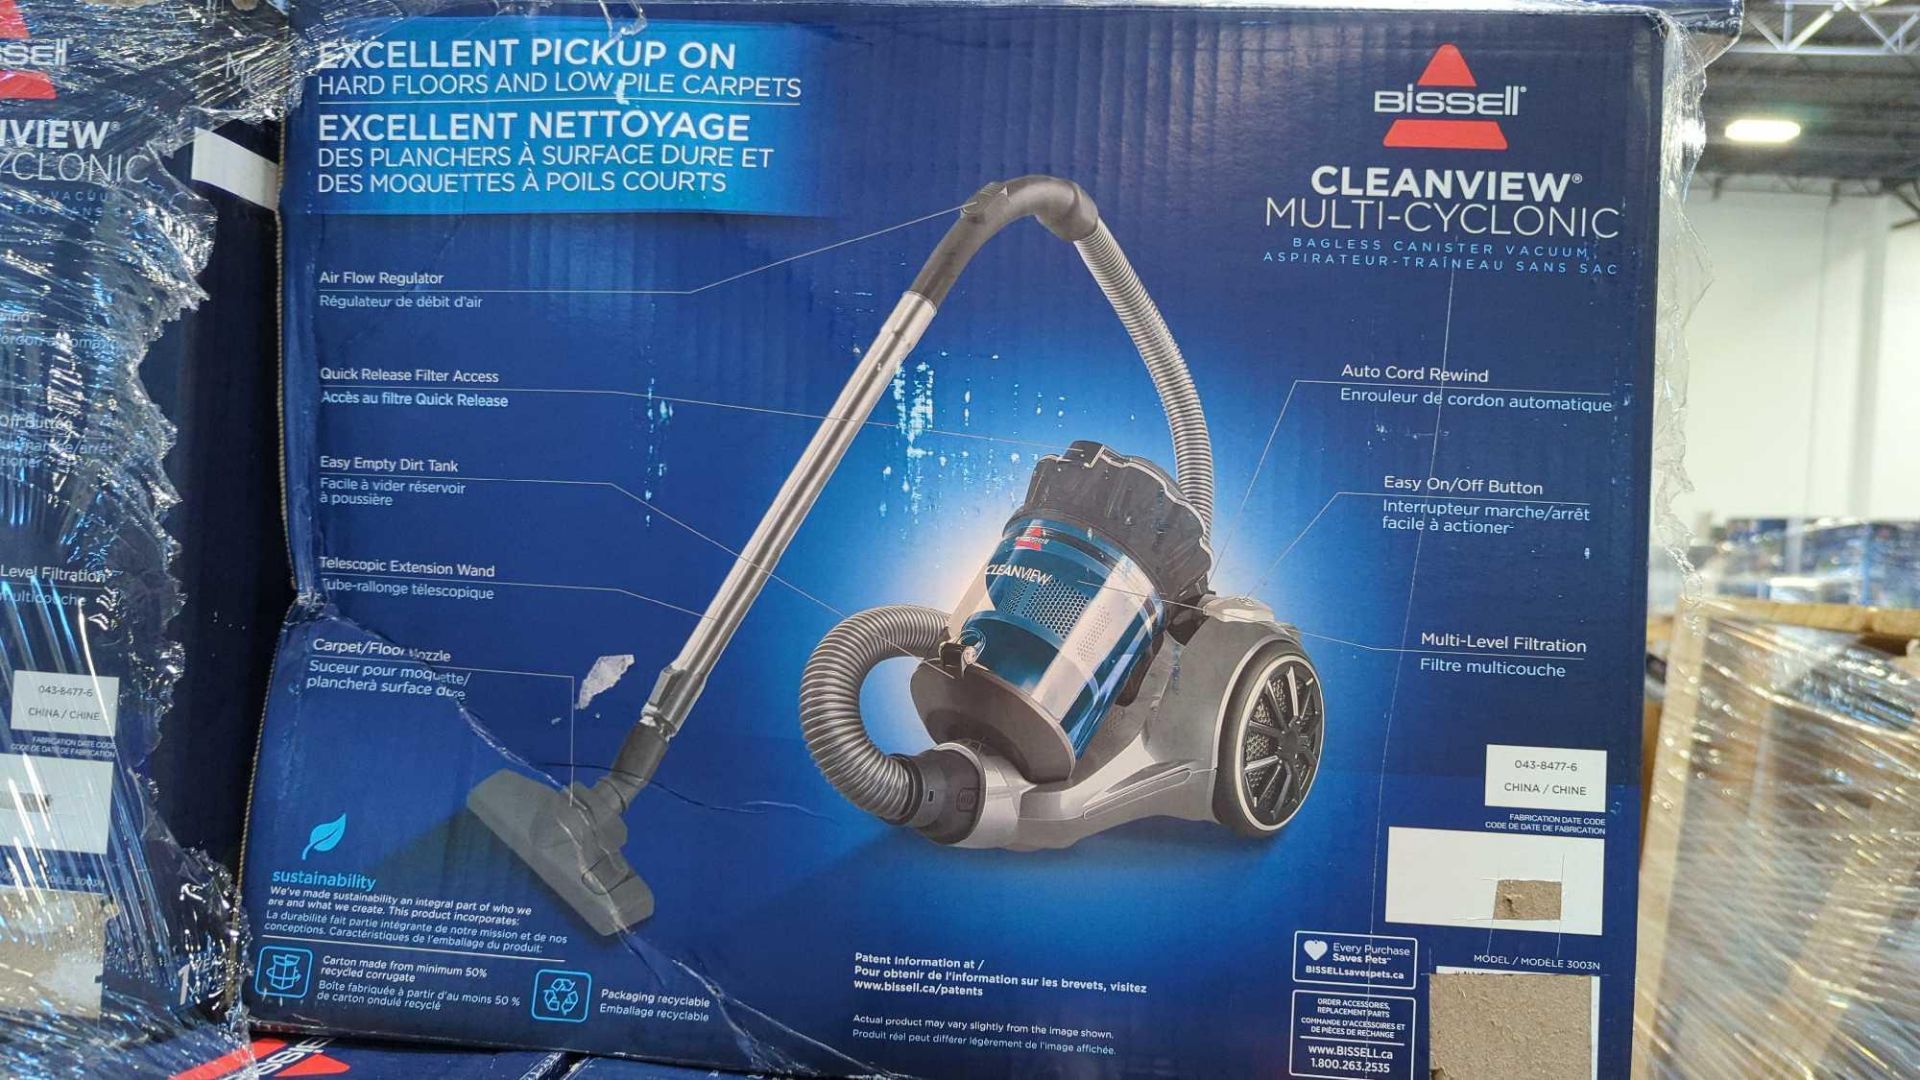 Bissell vacuums - Image 6 of 12